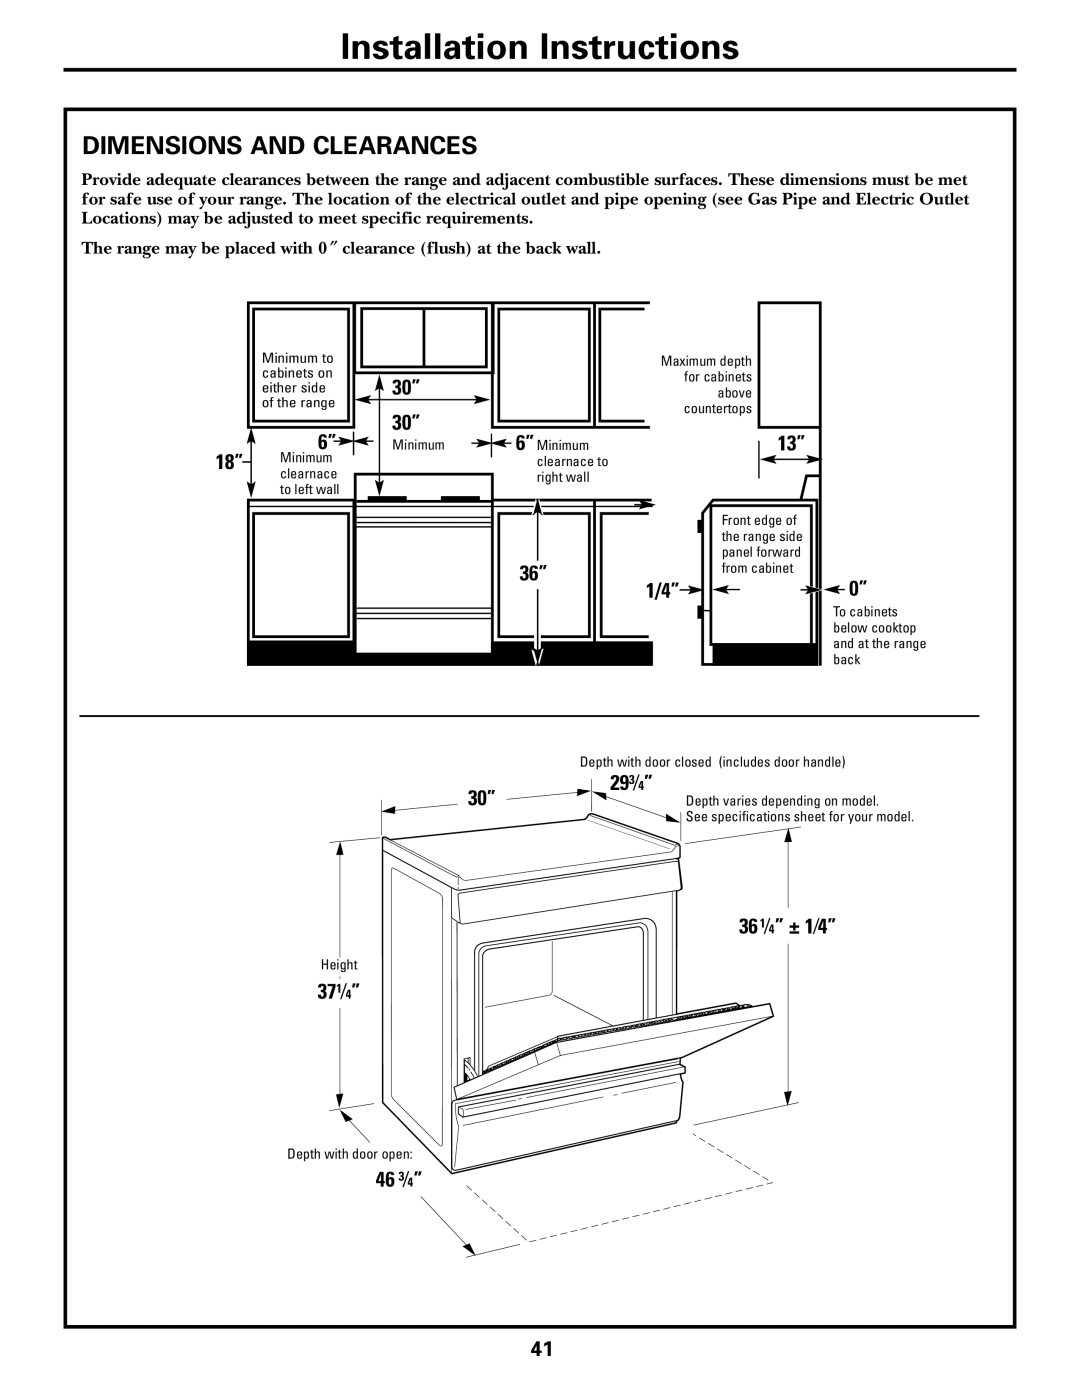 GE CGS980 Dimensions And Clearances, 30” 30”, 1/4” 0”, 29 3⁄ 4”, 36 1⁄4” ± 1⁄4”, 46 3⁄4”, Installation Instructions 